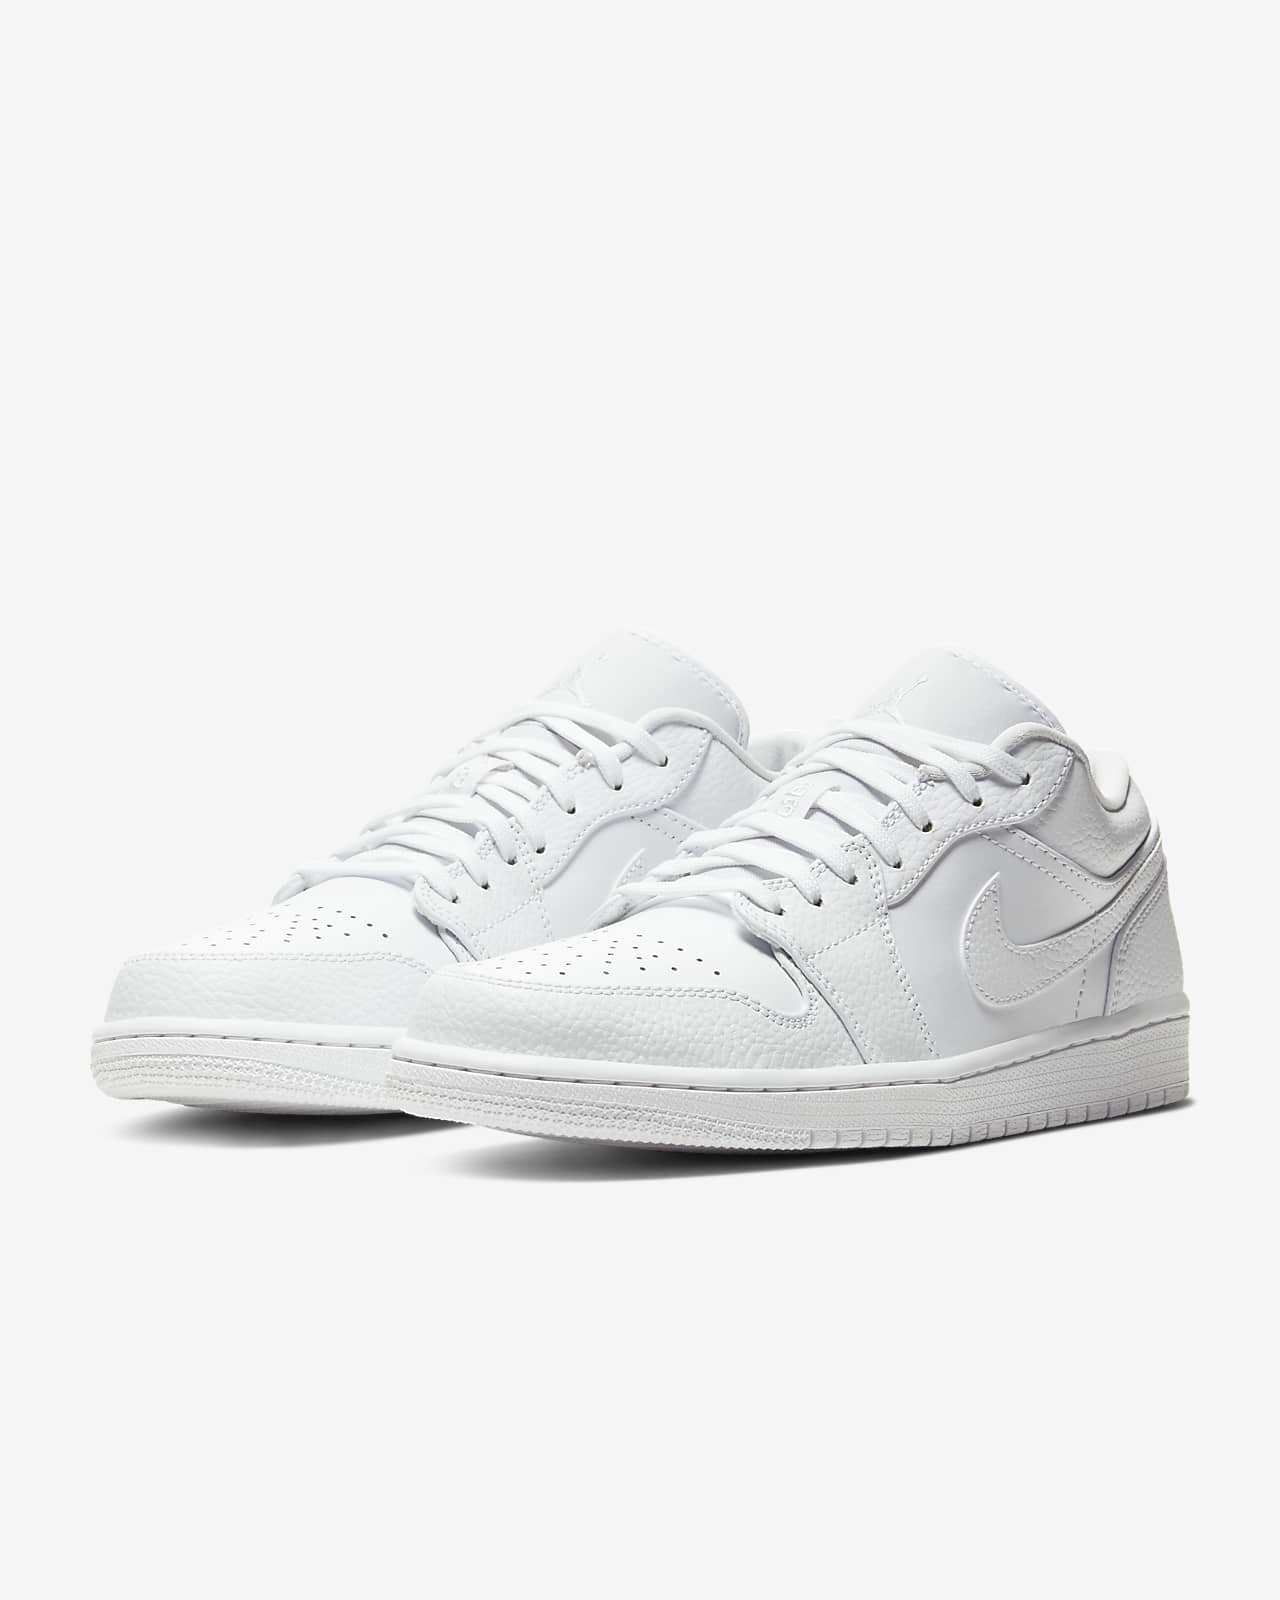 jd1 low all white